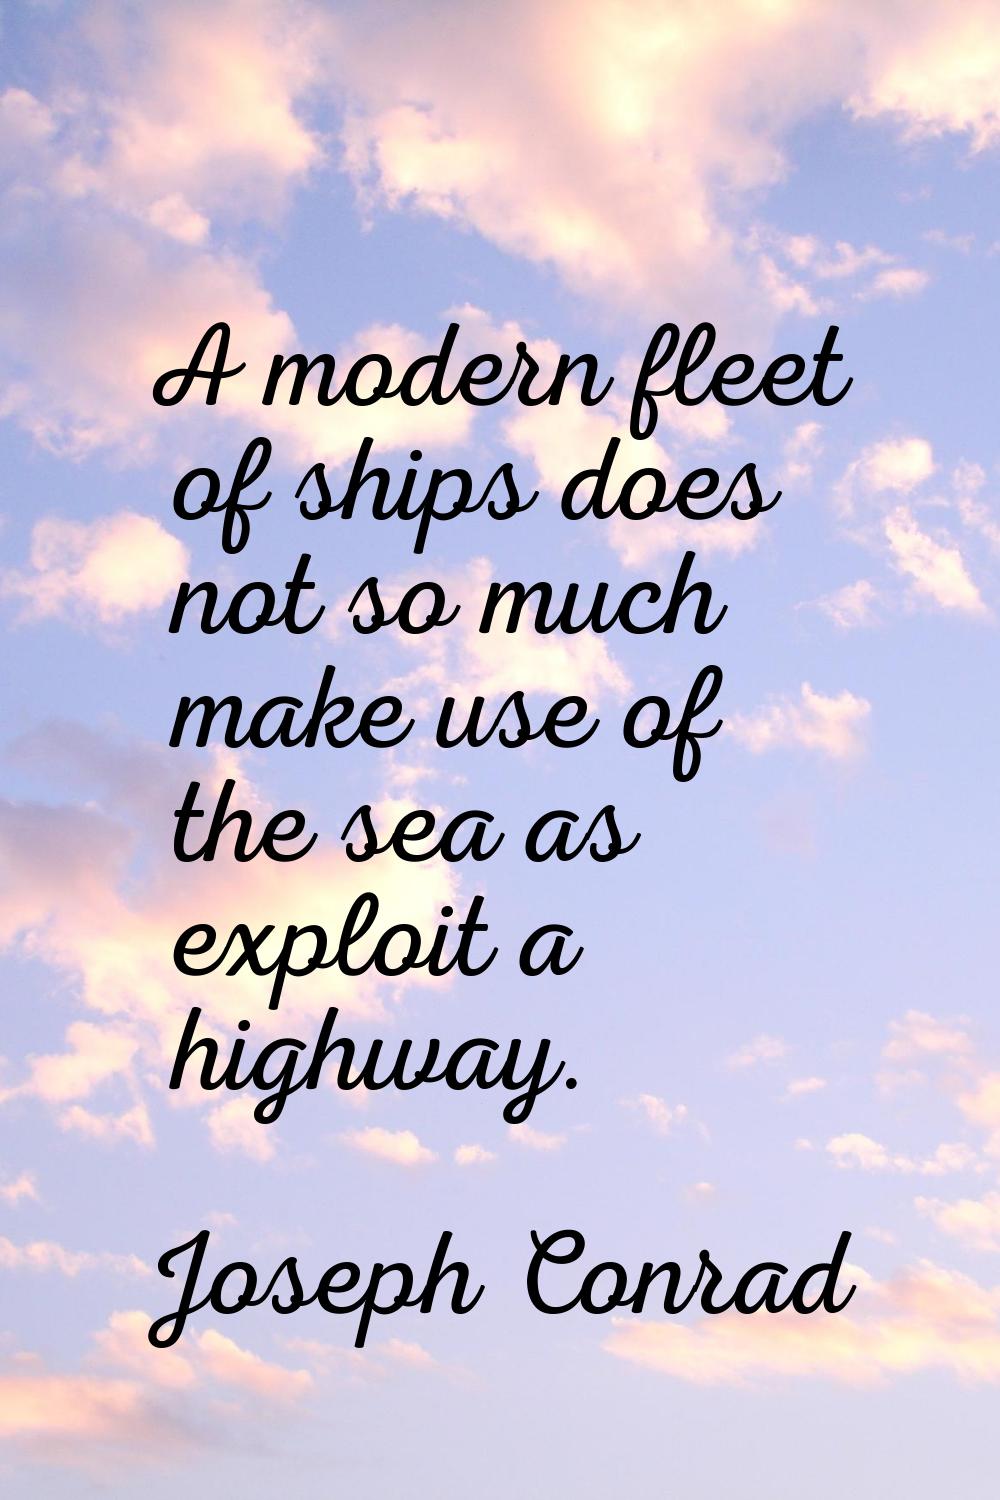 A modern fleet of ships does not so much make use of the sea as exploit a highway.